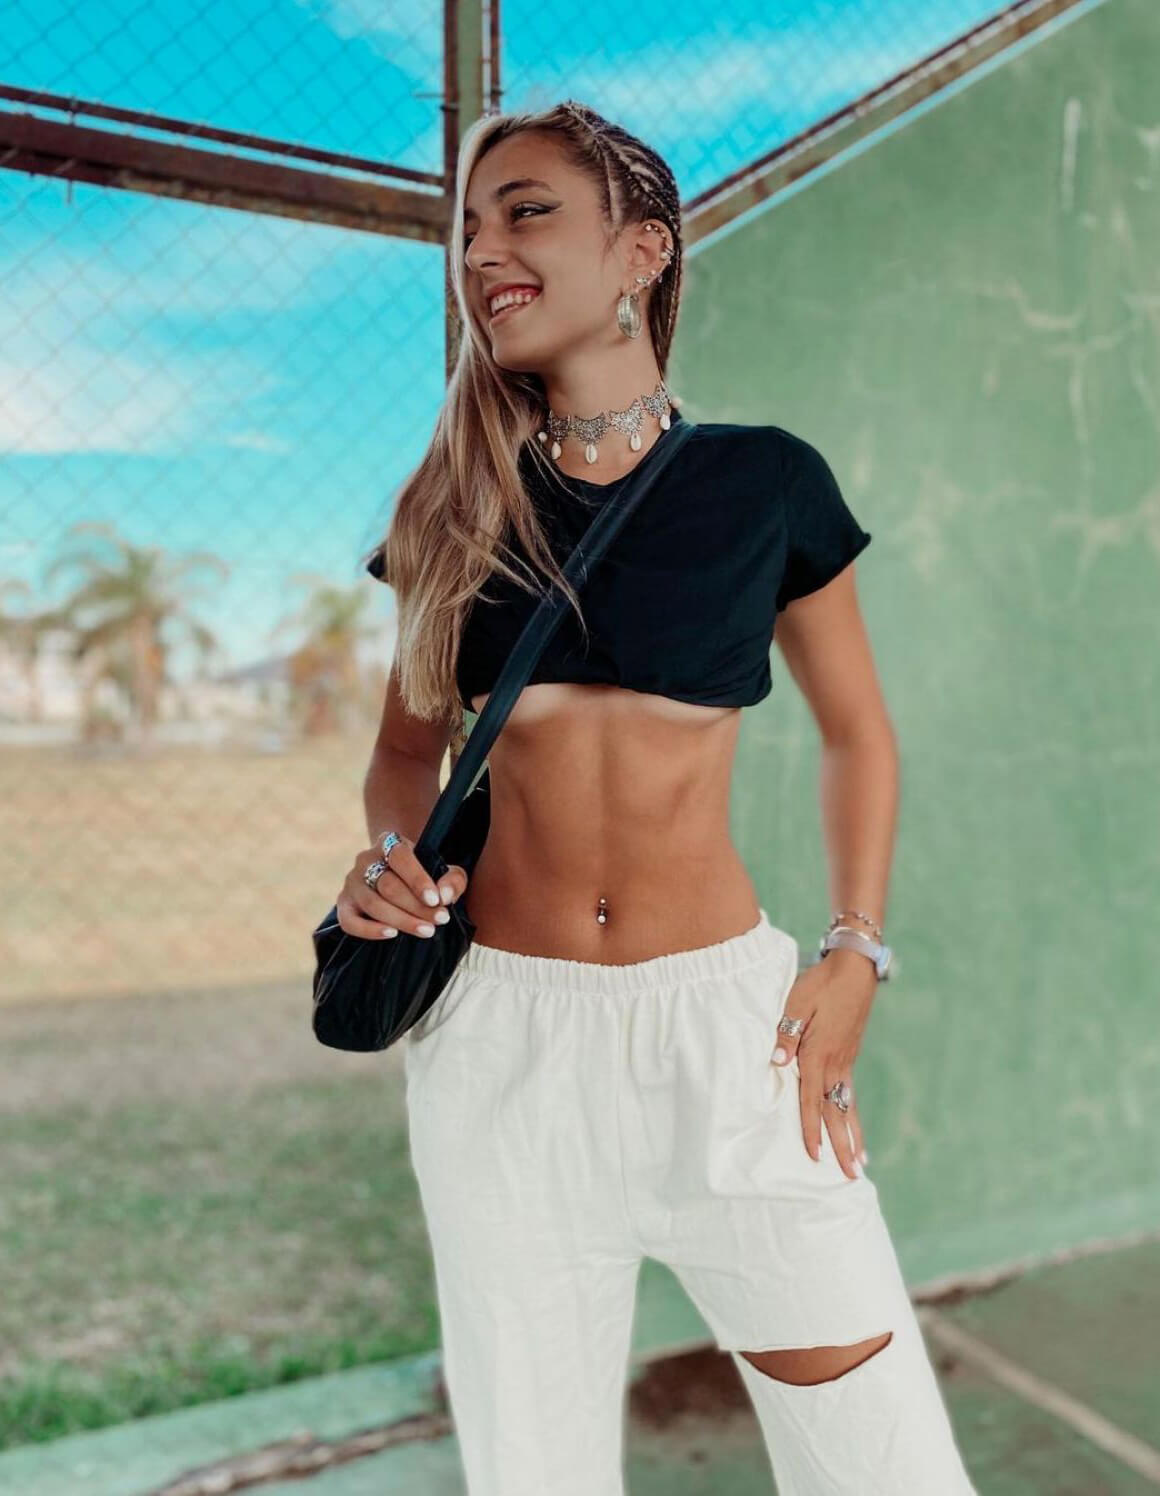 Angeles Watters in Show off her Abs in Short Top and White Pants Photos 12/03/2020